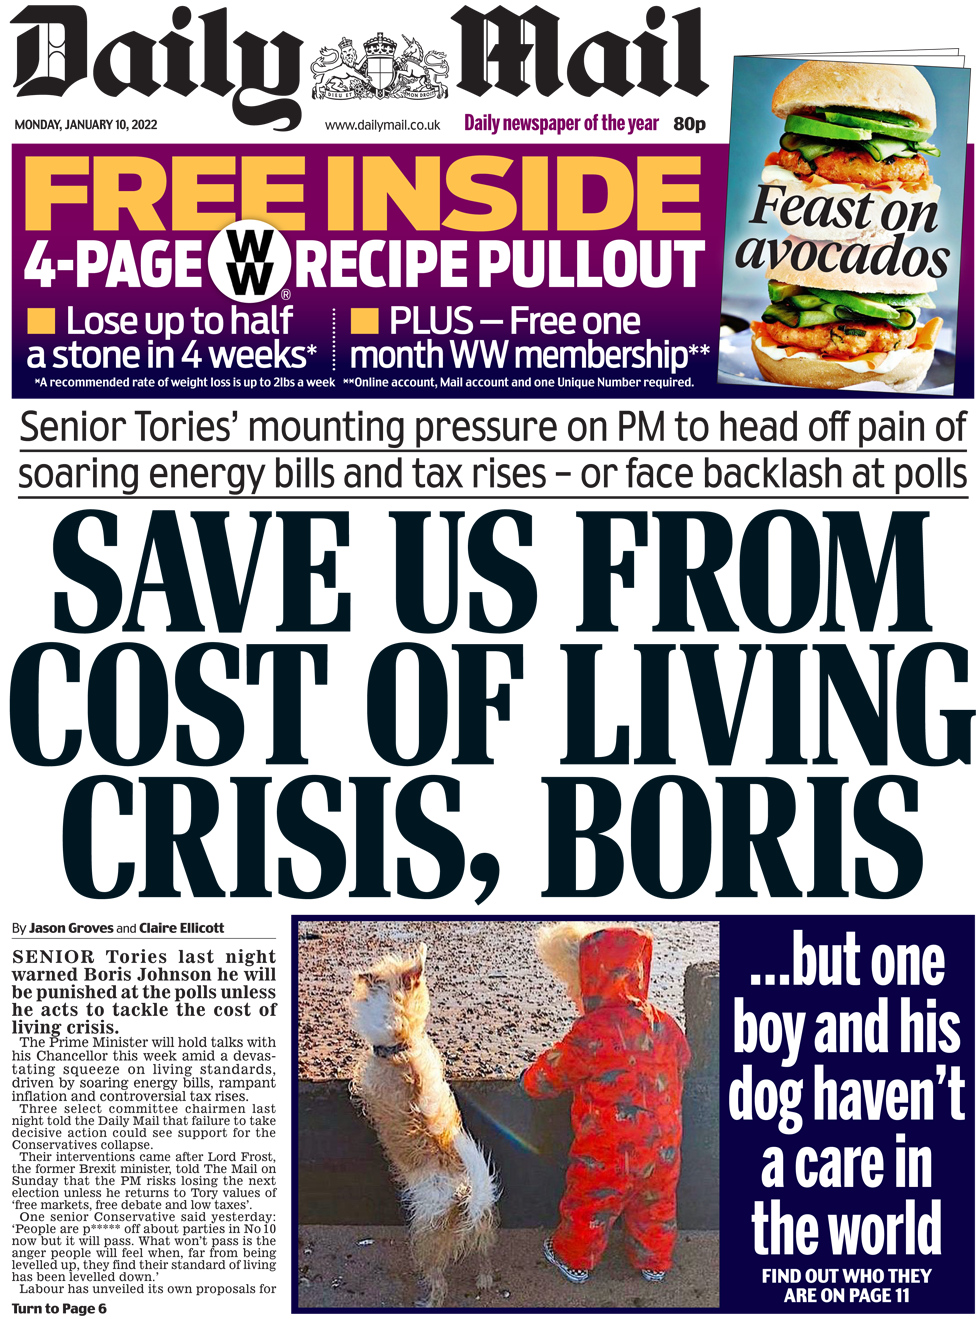 The Daily Mail front page 10 January 2022